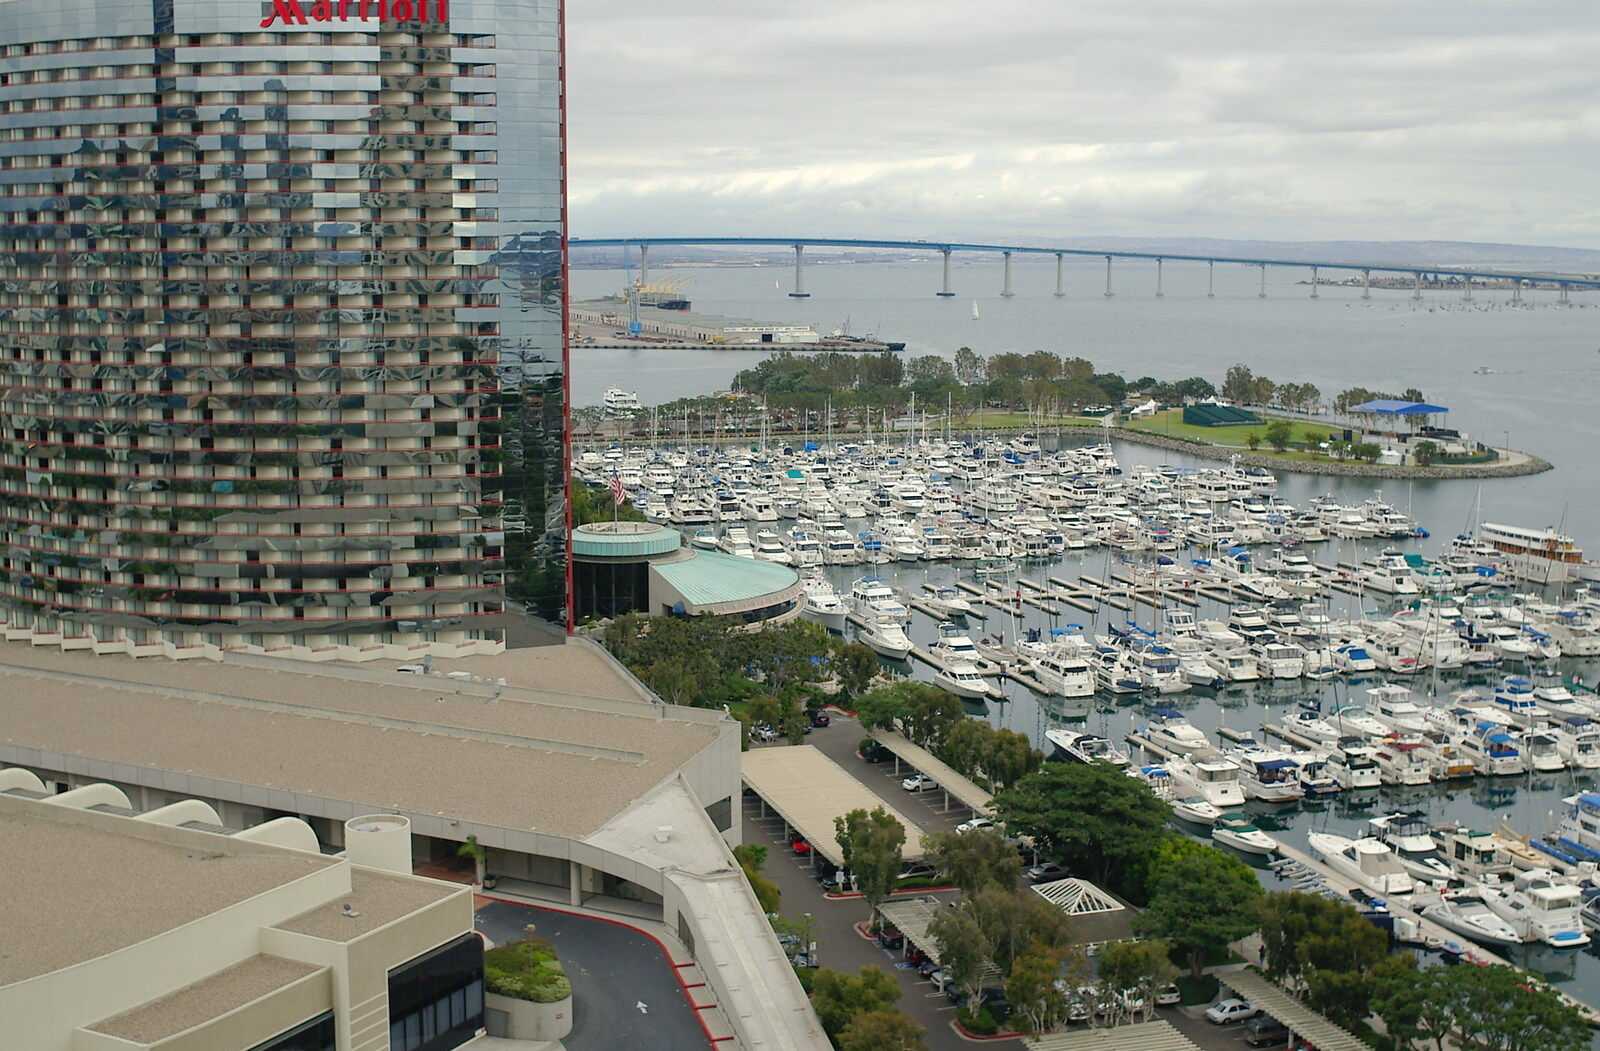 The shiny Marriott Hotel, and the Coronado Bridge from The BREW Developers Conference, San Diego, California - 2nd June 2005